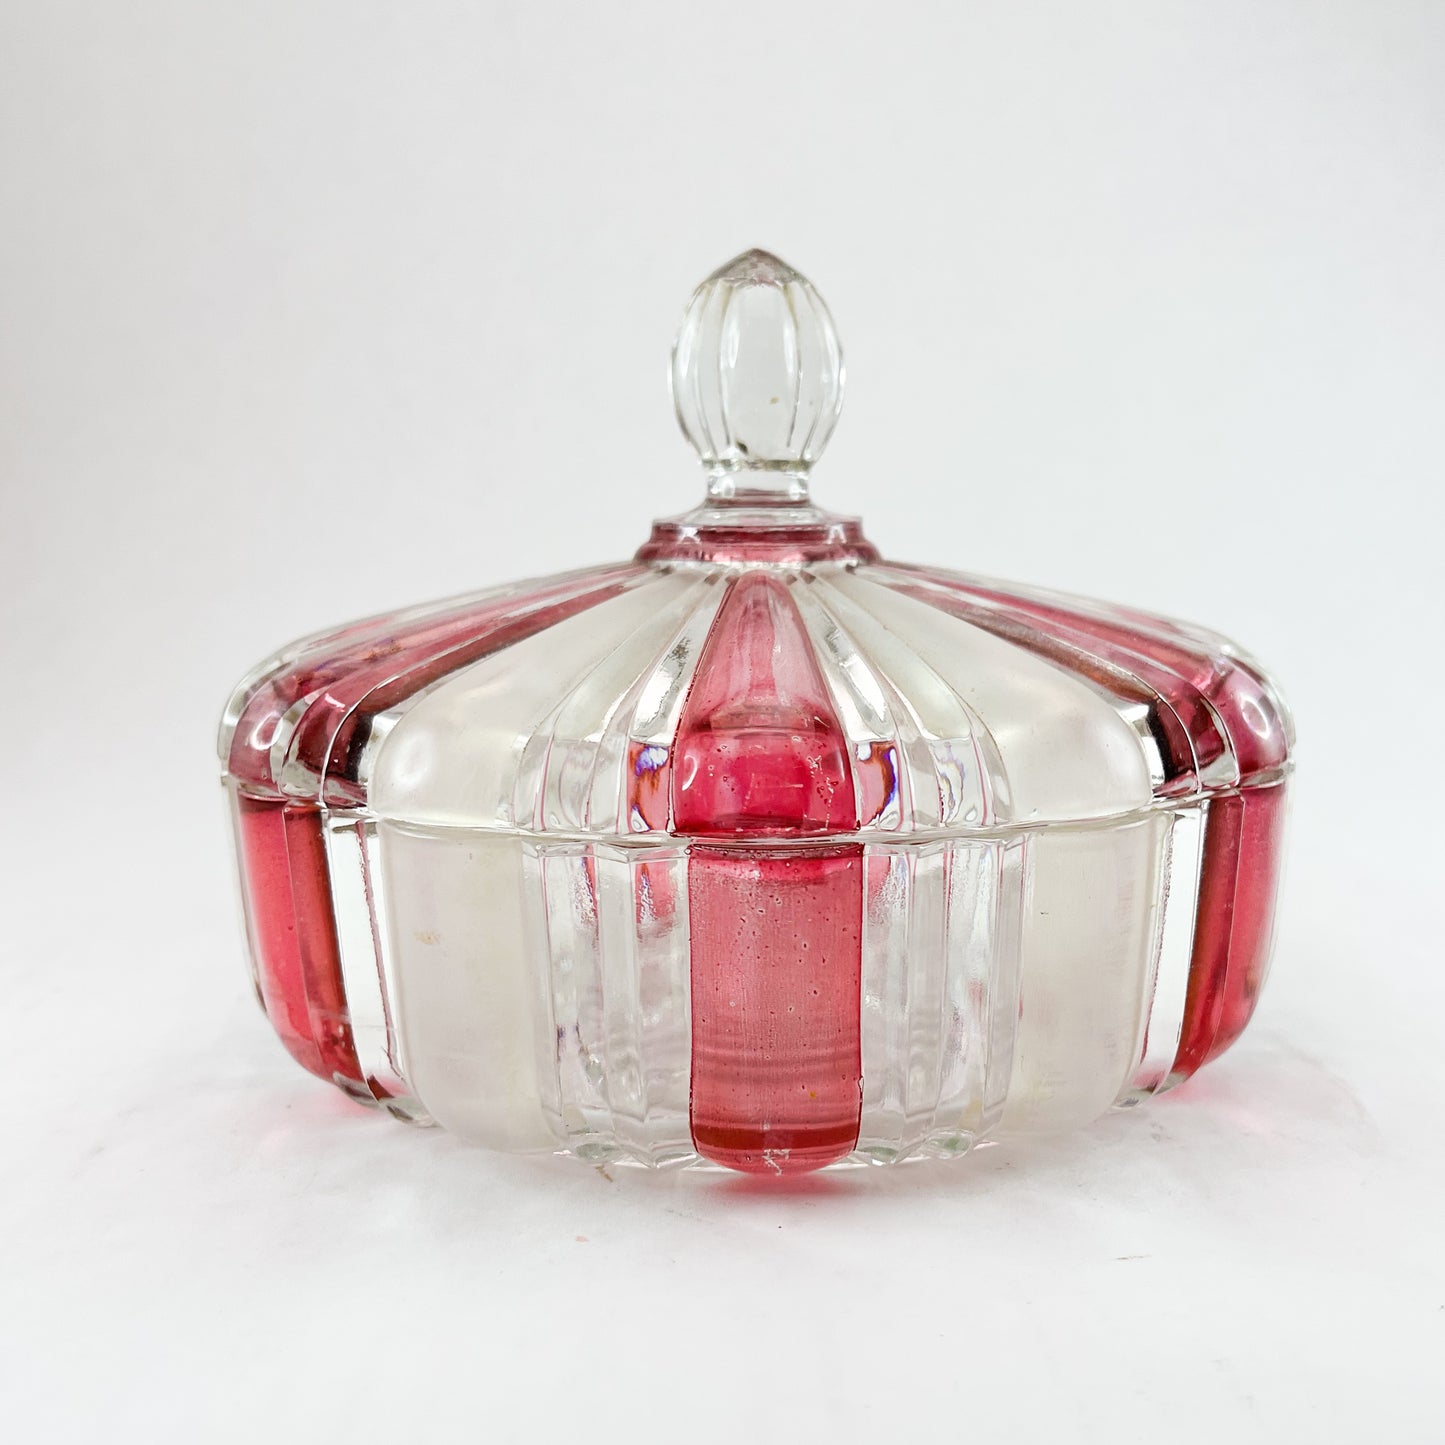 Peppermint Candy Dish